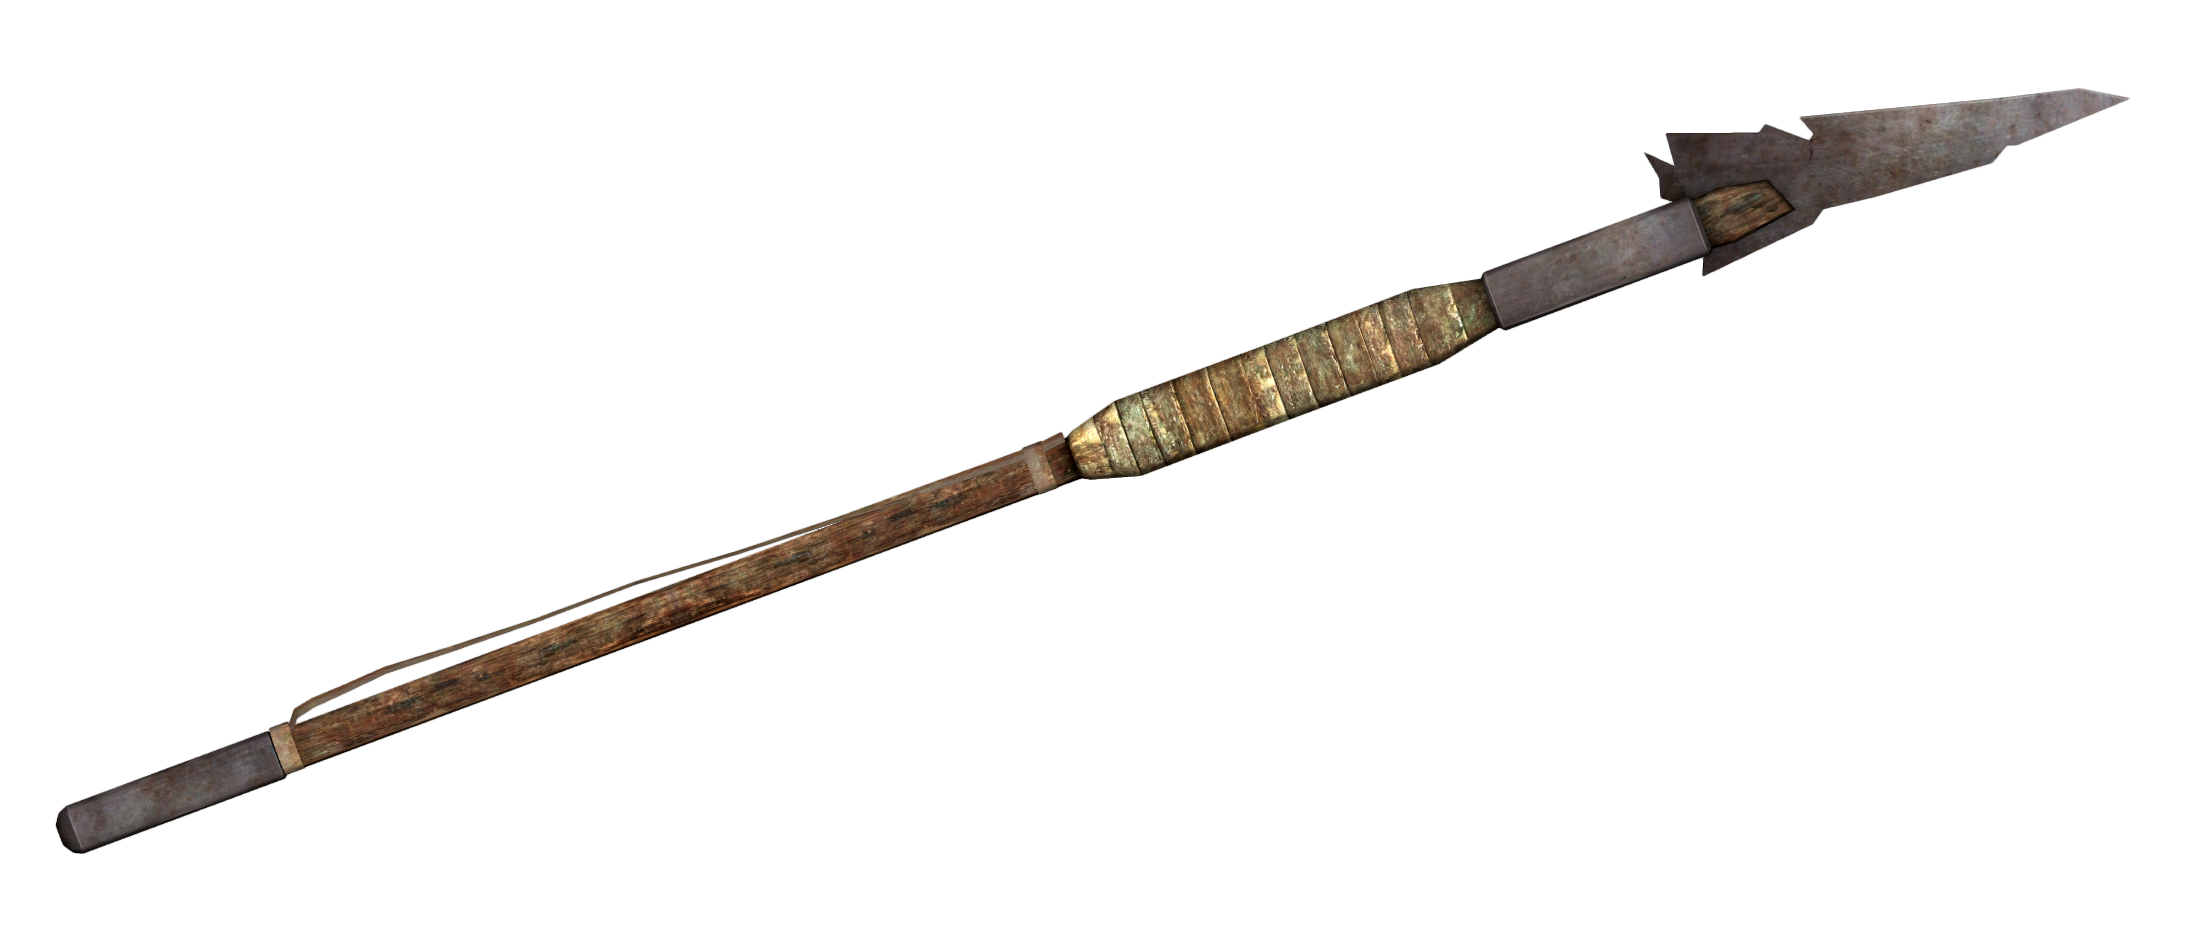 Throwing spear - The Fallout wiki - Fallout: New Vegas and more